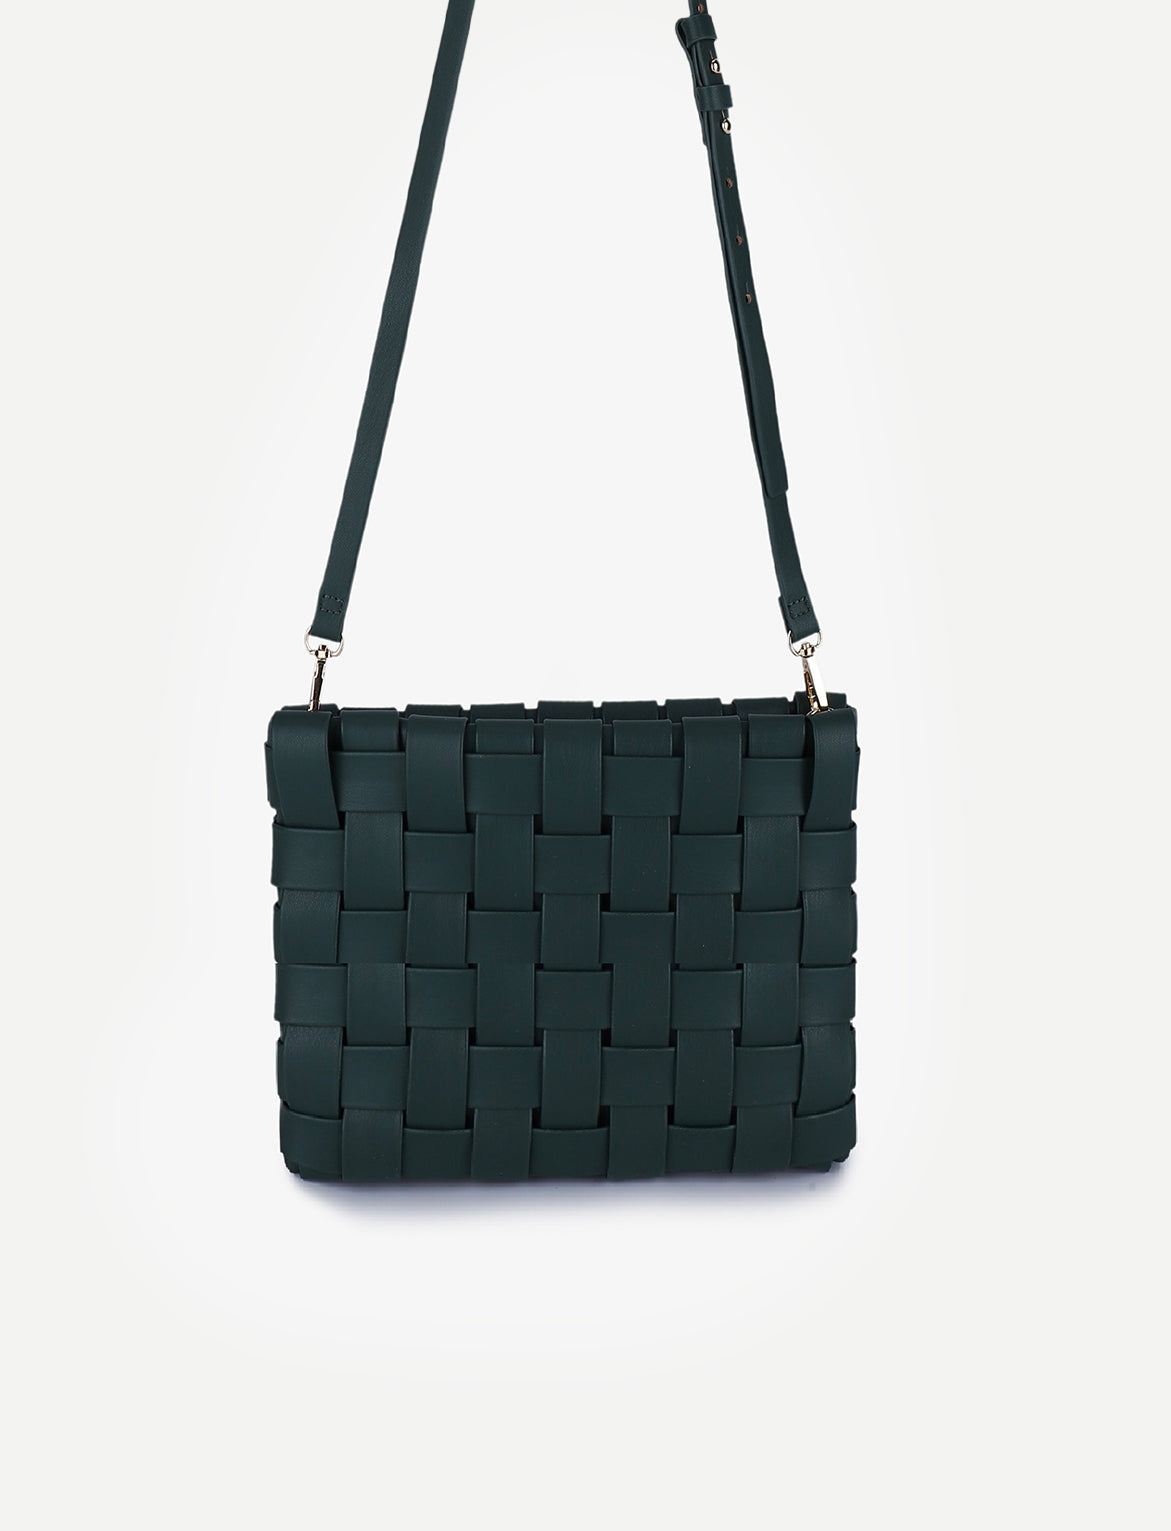 LINDY CLUTCH WOVEN LARGE EMERALD